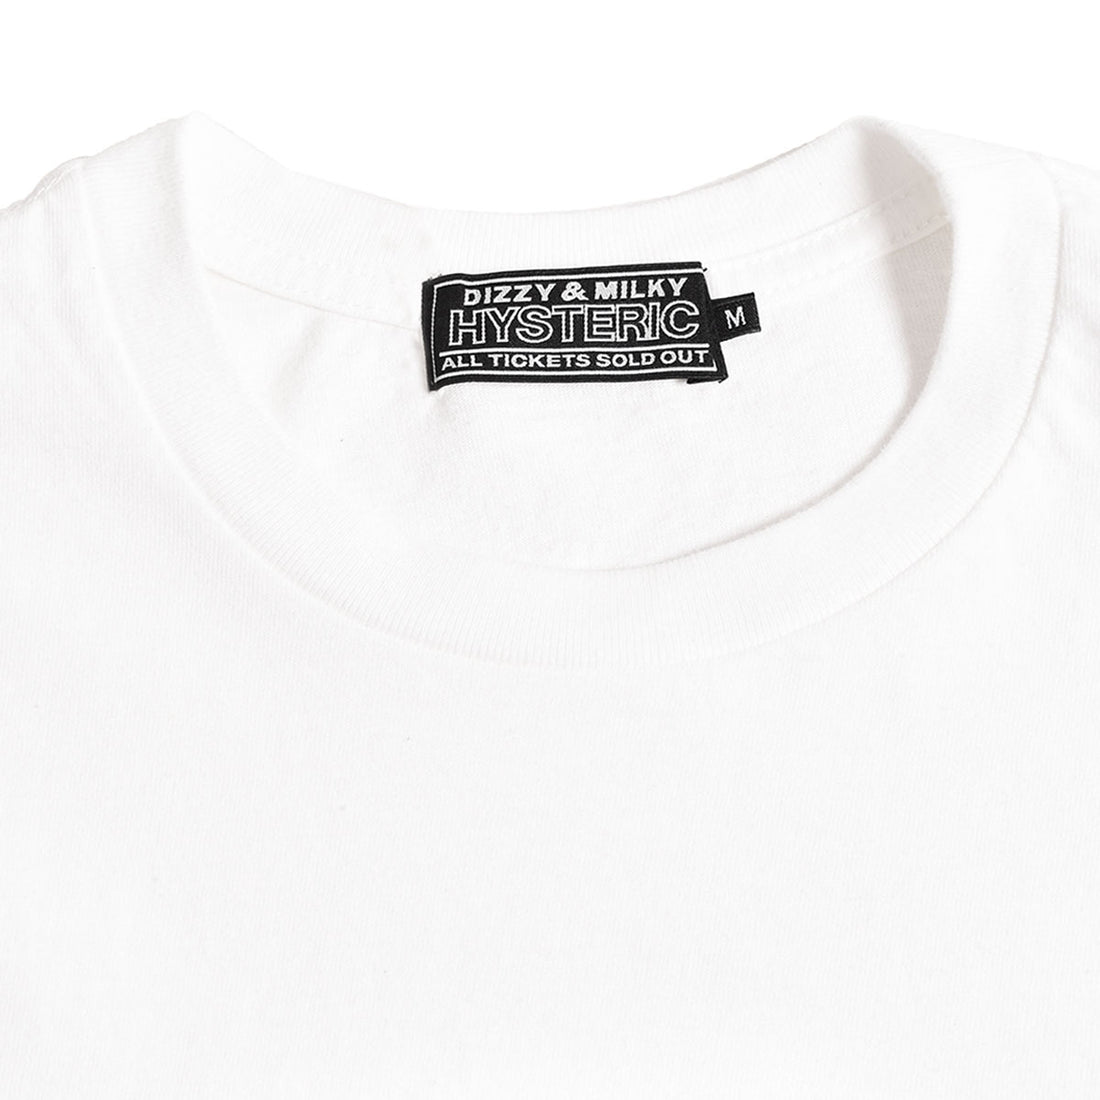 [HYSTERIC GLAMOUR]RELIEVES TENSION Tシャツ/WHITE(02233CT02)